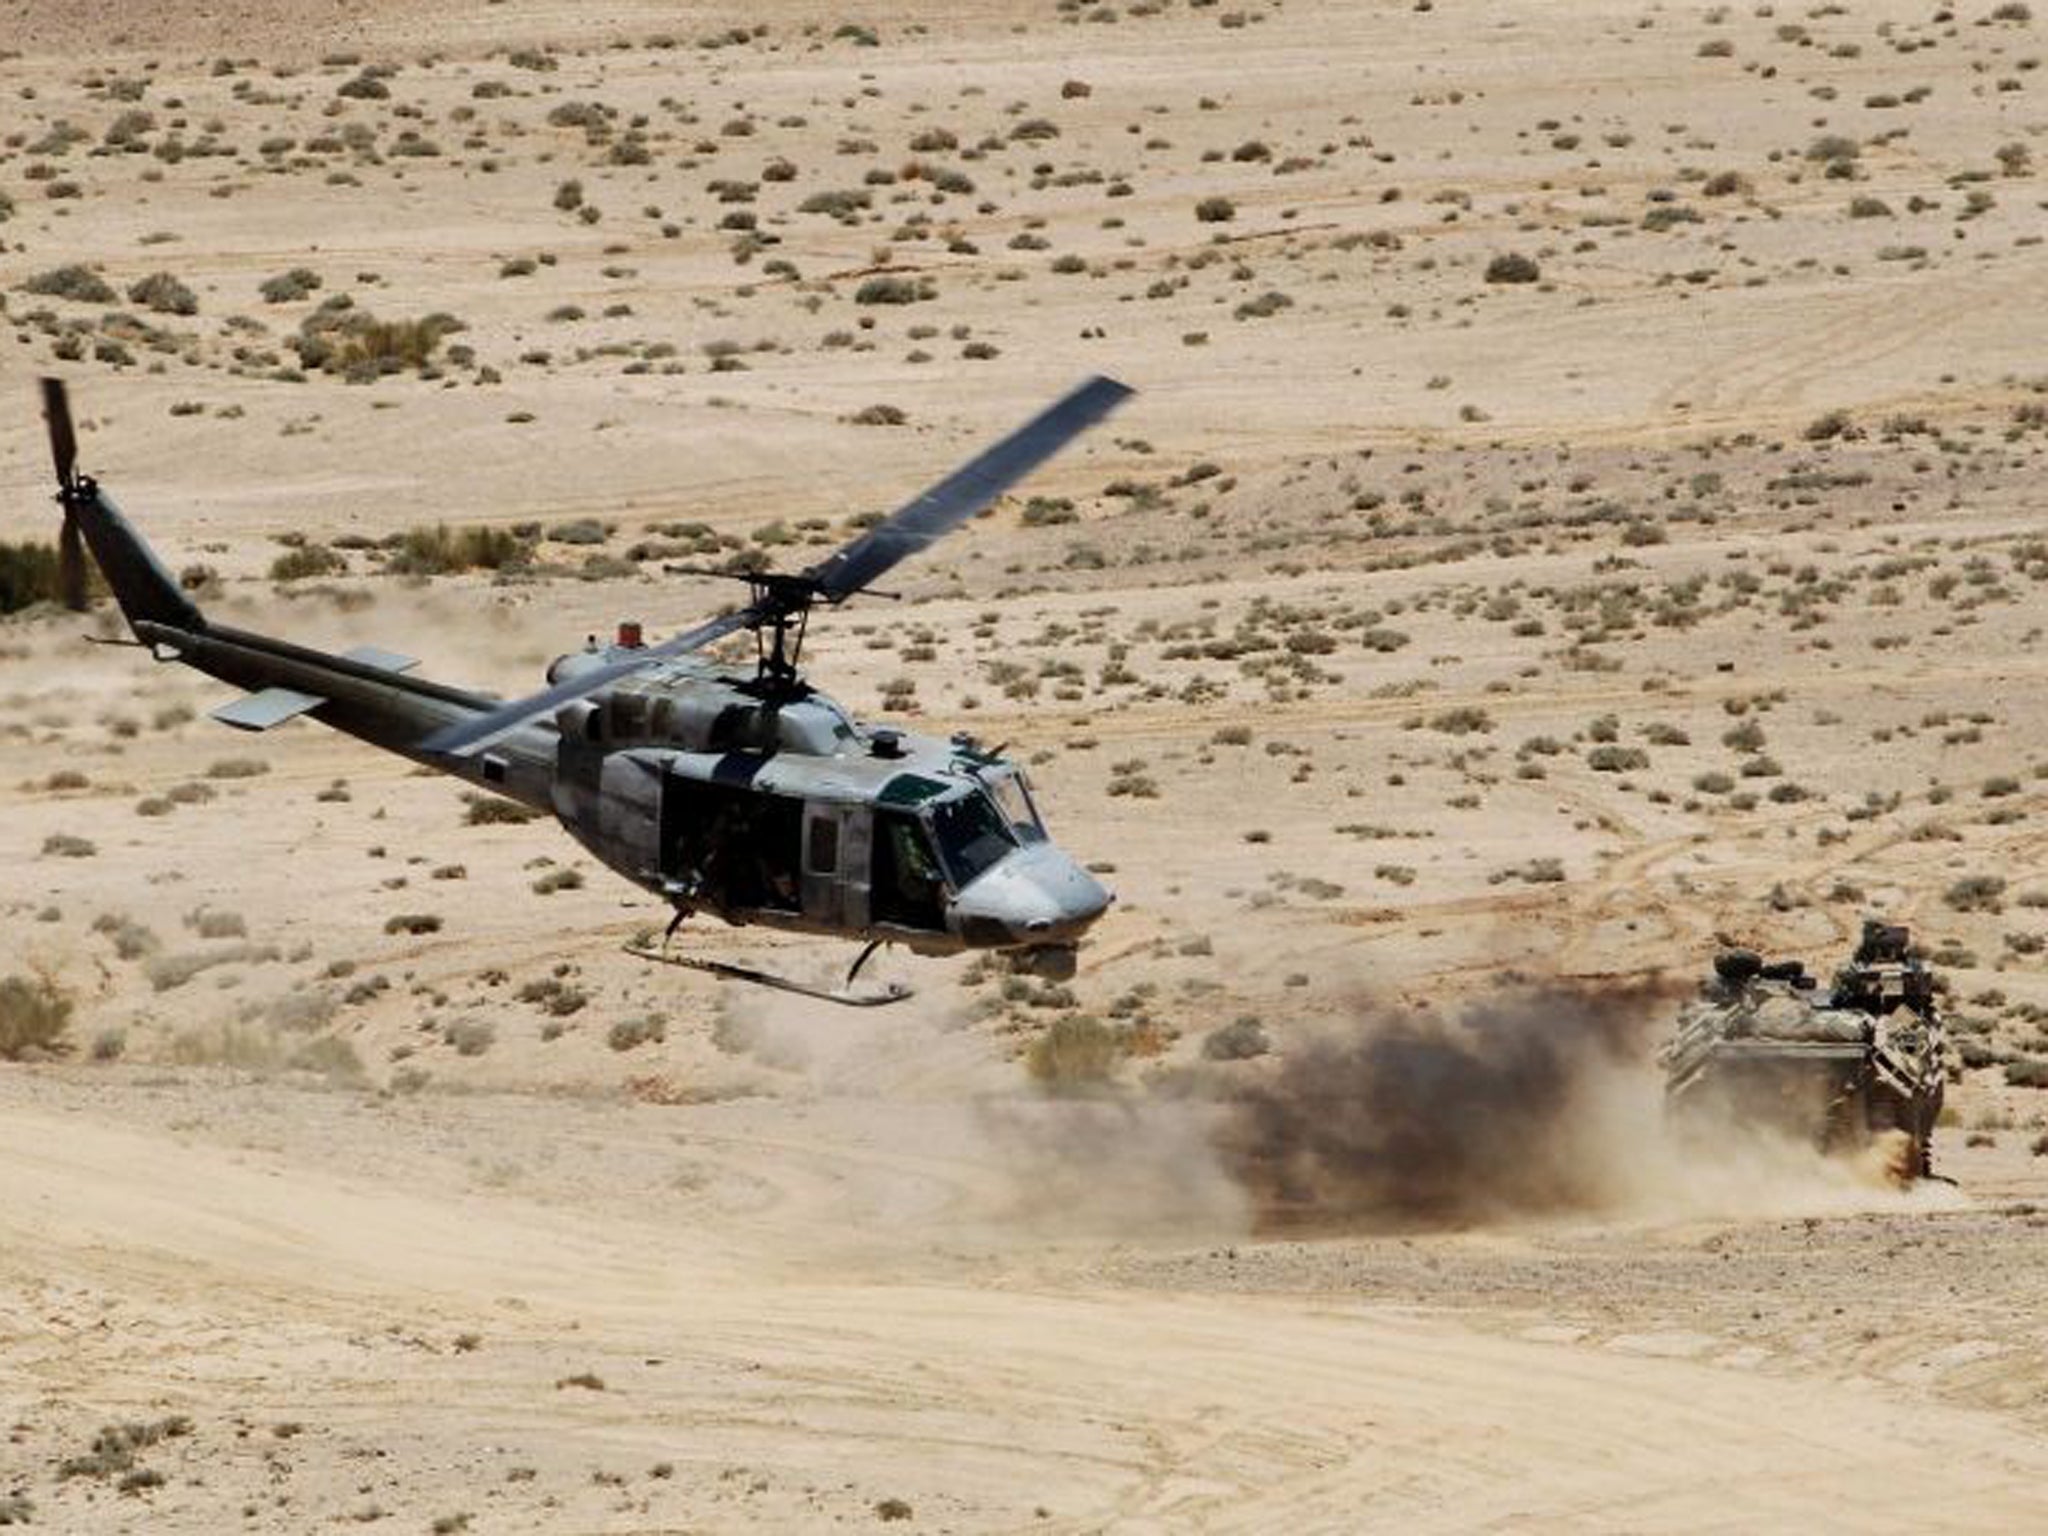 Military forces participate in the "Eager Lion" military exercises near Aqaba city, 290 km (180 miles) south of Amman